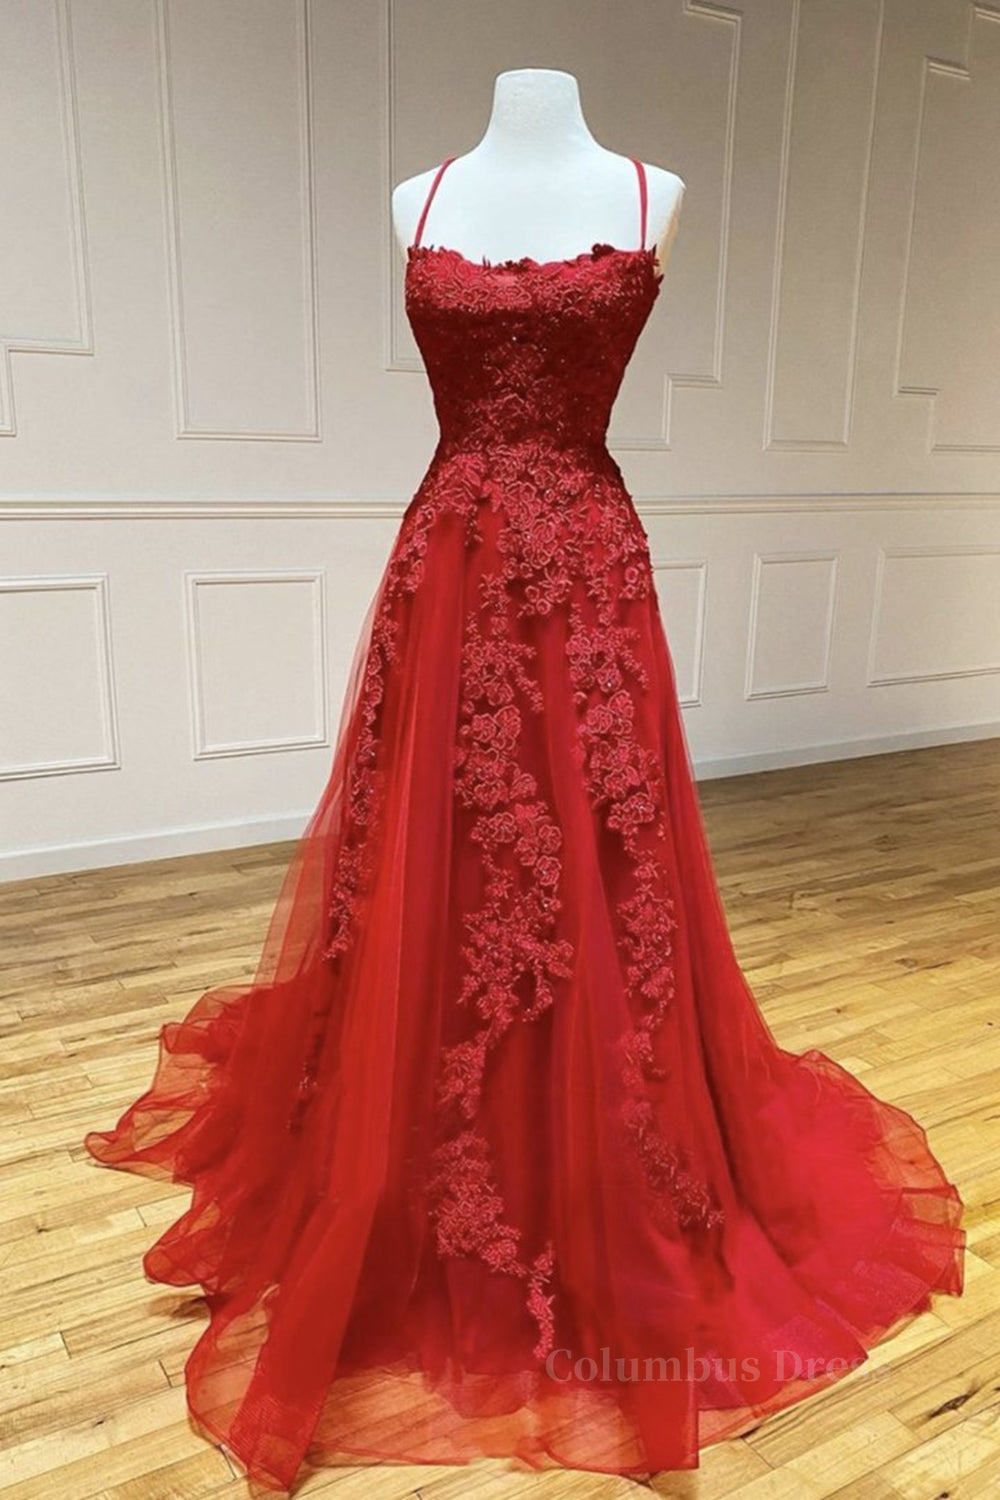 Evening Dresses Yde, A Line Backless Red Lace Long Prom Dress, Long Red Lace Formal Dress, Red Evening Dress